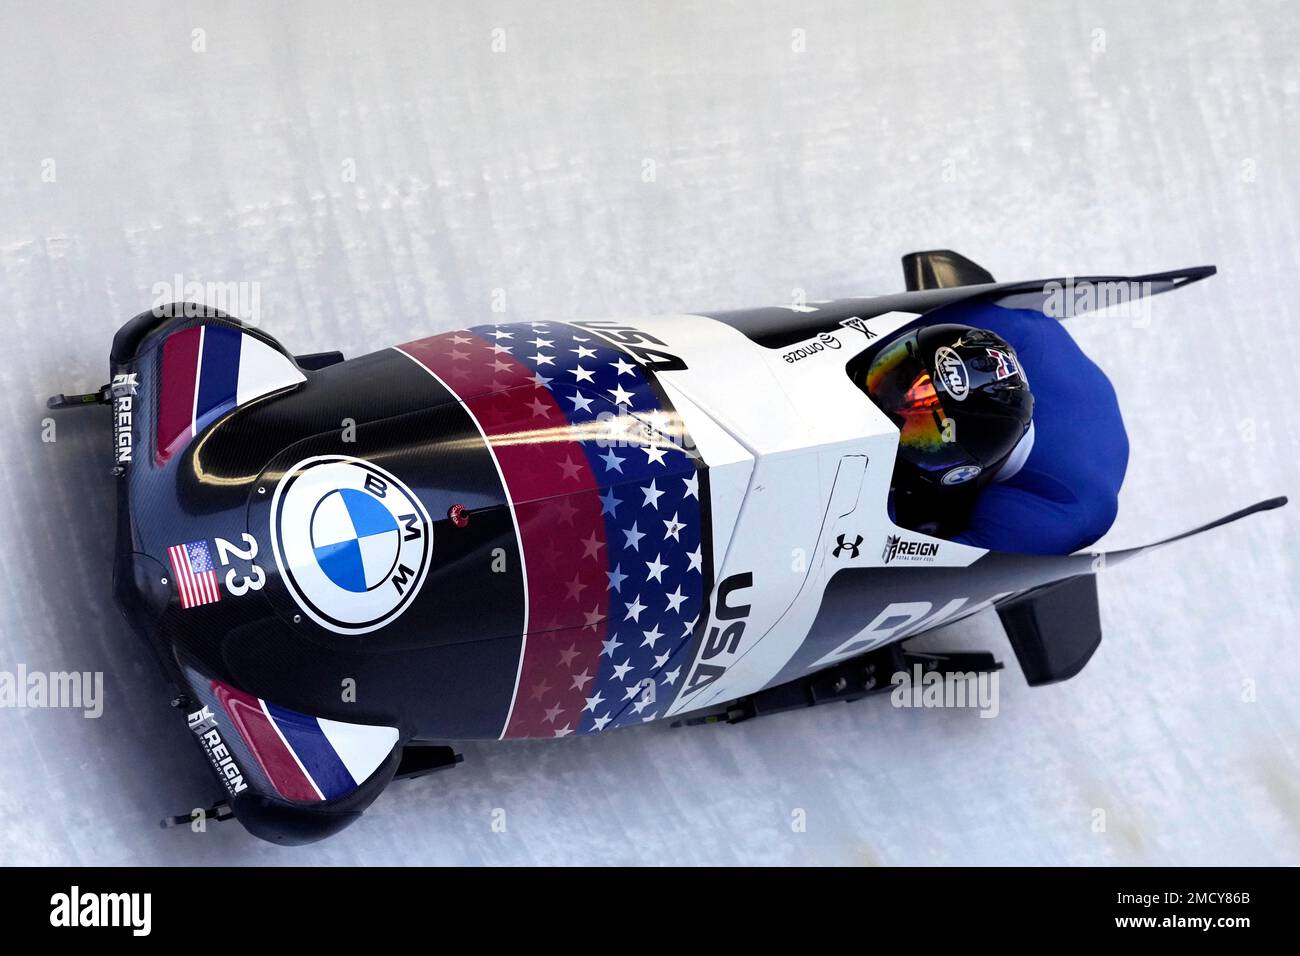 Codie Bascue and Carlo Valdes of the United States speed down the track during the mens two-man bobsleigh World Cup race in Igls, near Innsbruck, Austria, Saturday, Nov